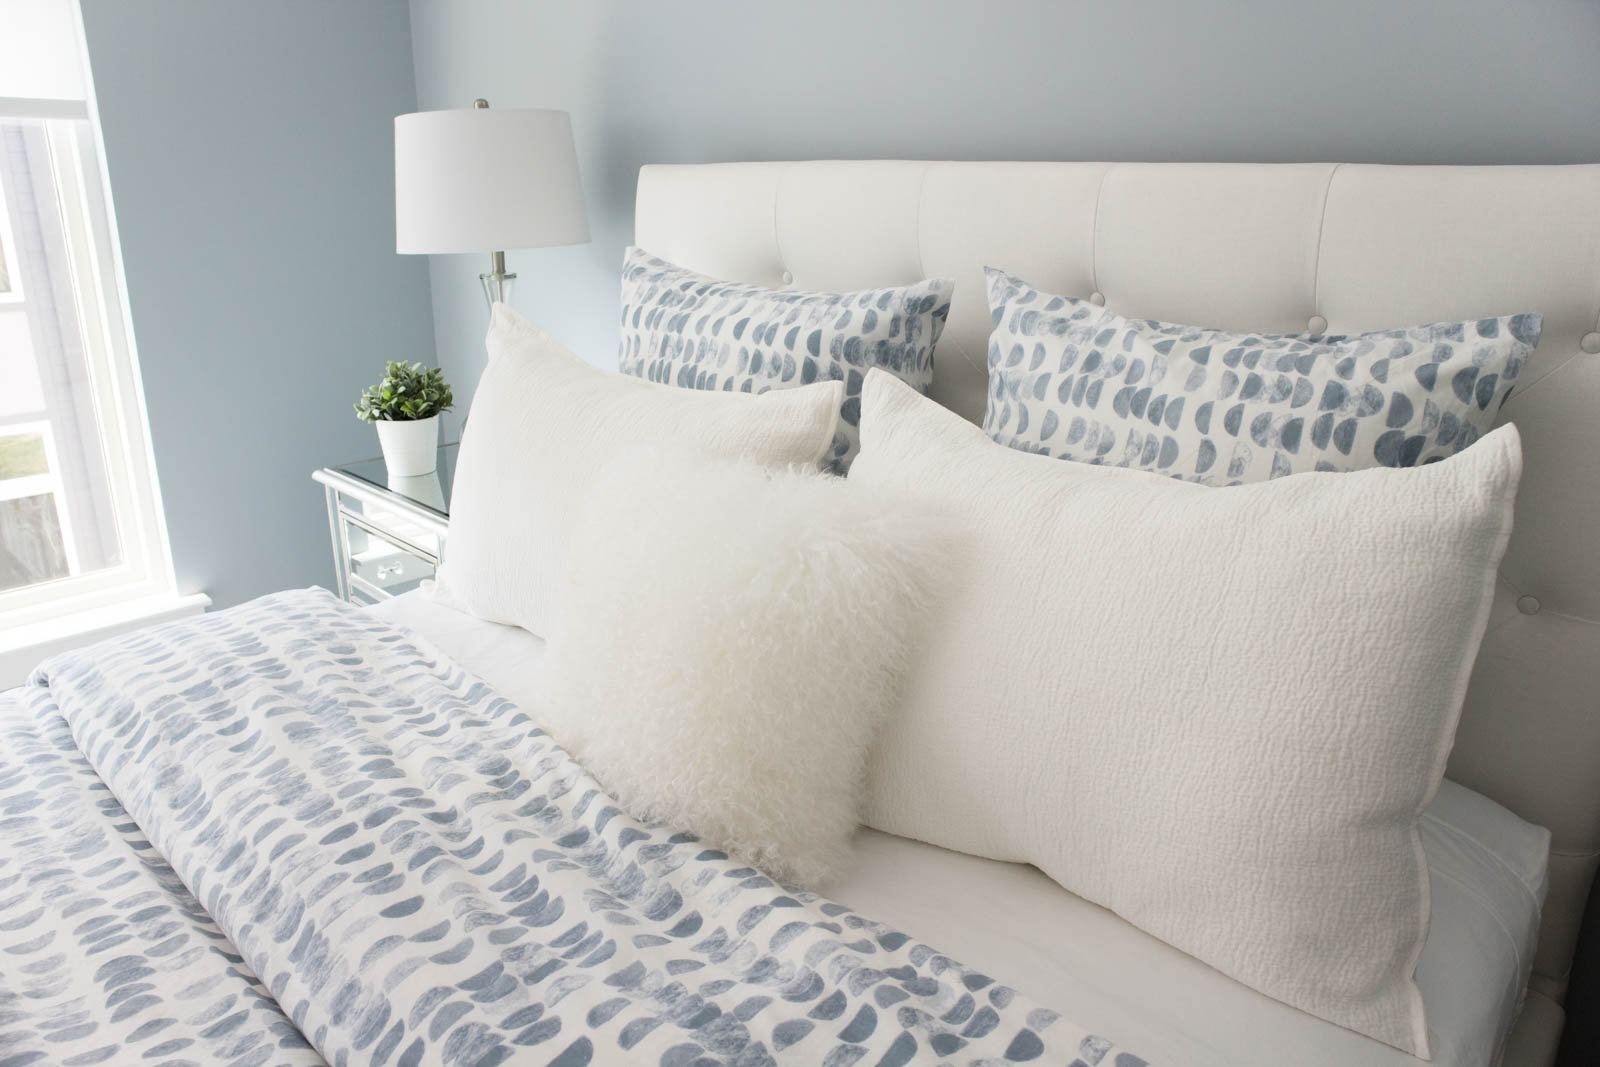 Pottery Barn Lorraine bed, guest bedroom home tour